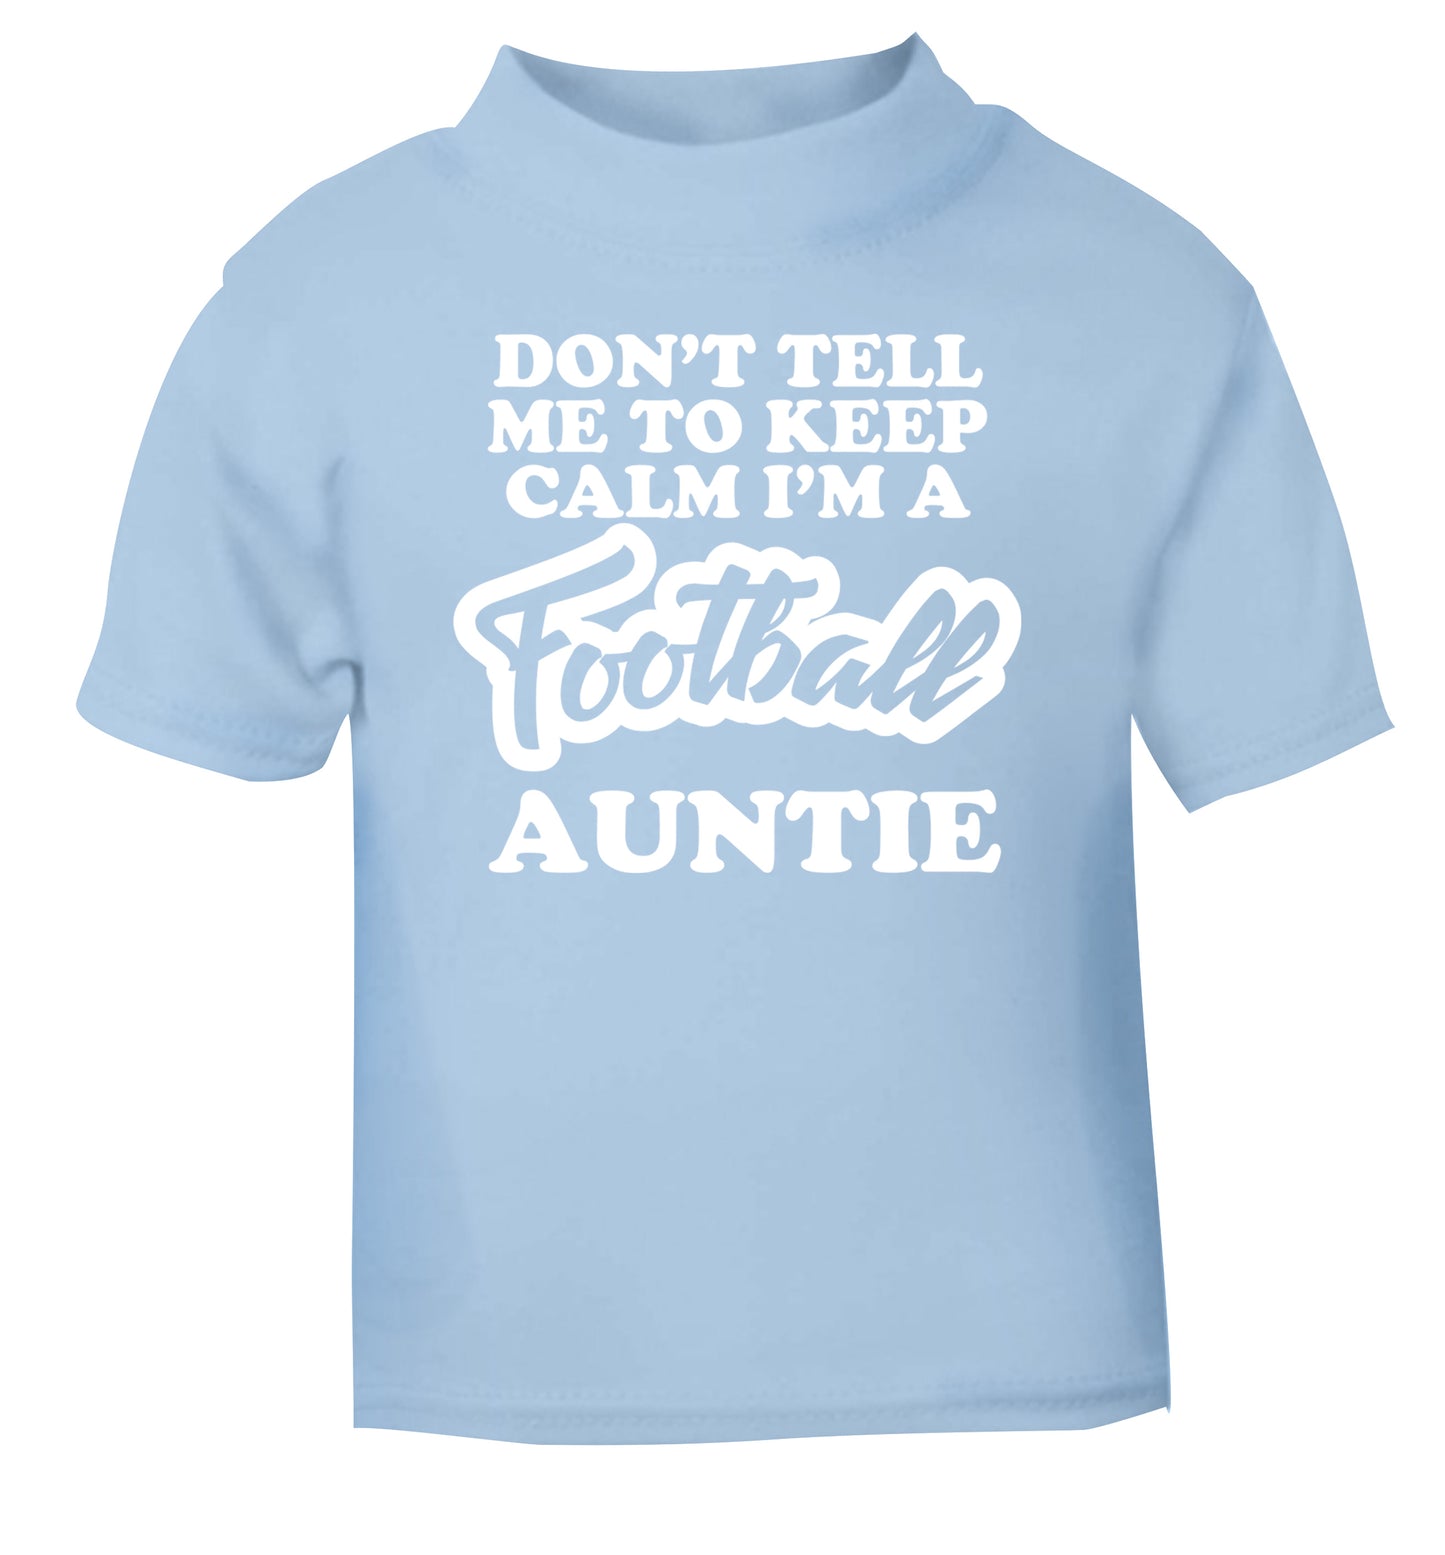 Don't tell me to keep calm I'm a football auntie light blue Baby Toddler Tshirt 2 Years